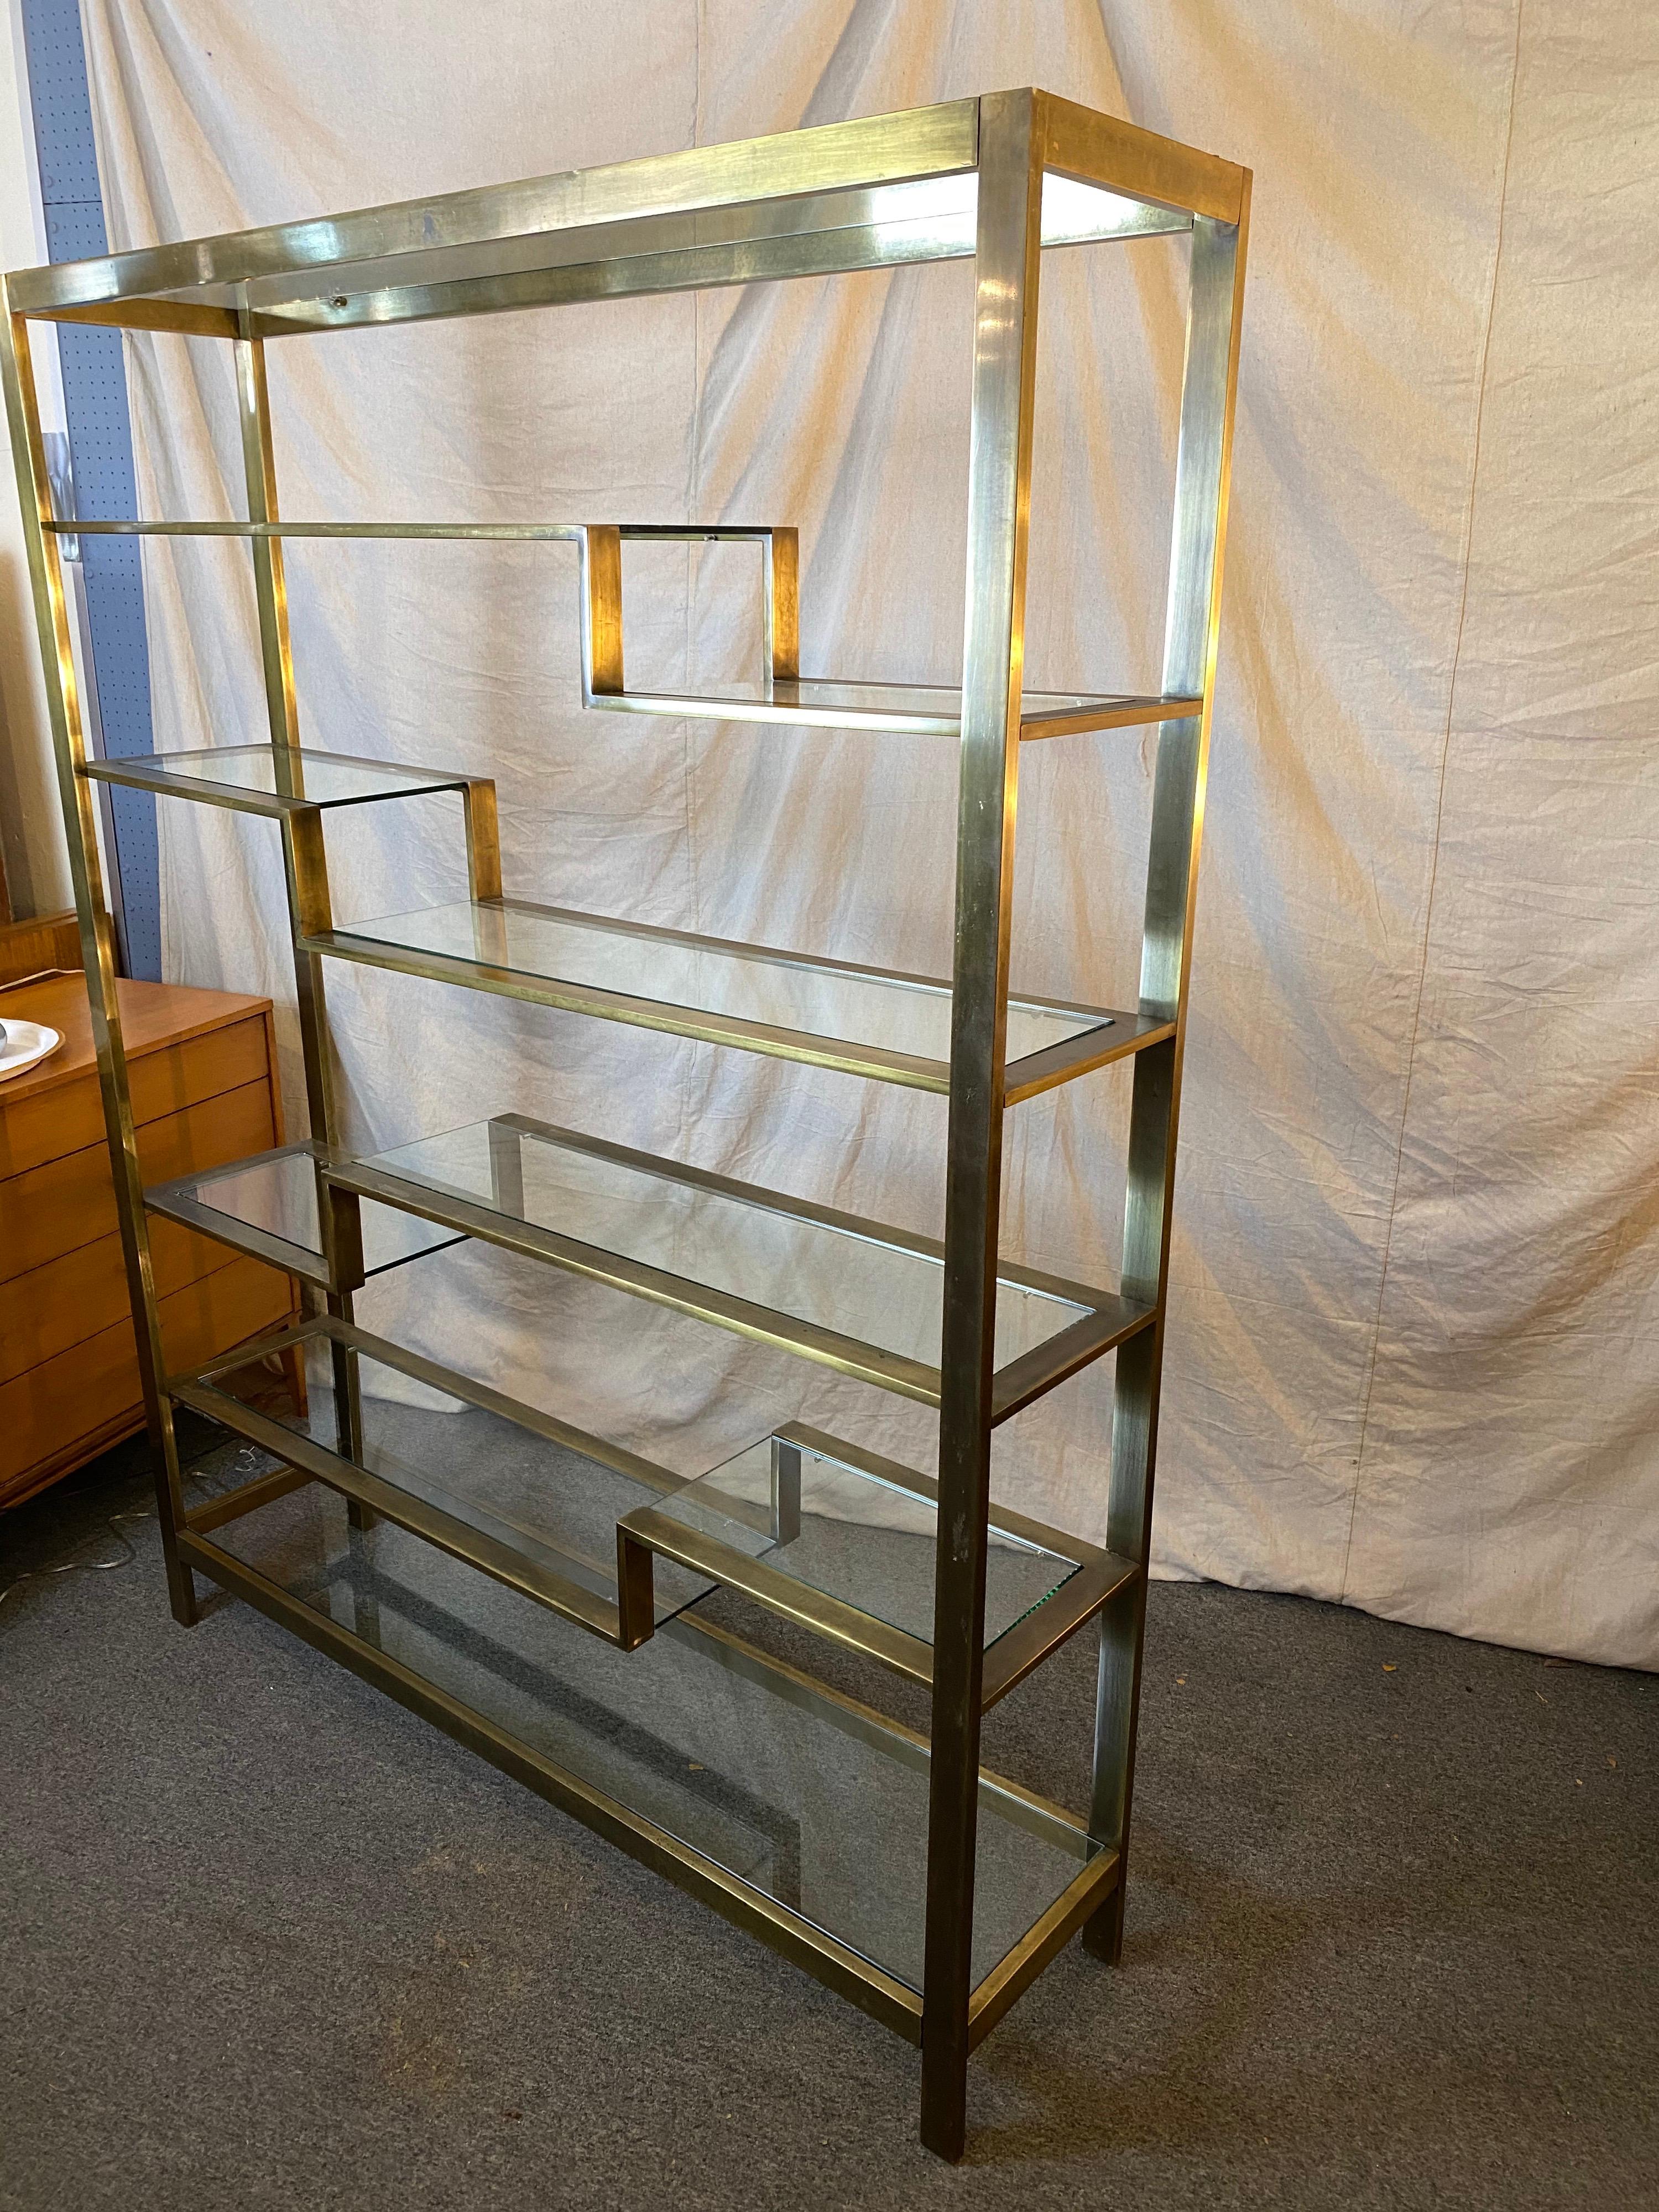 Large brushed brass étagère made up of a rectangular stock, great size and scale! 6 levels with glass shelves, one full glass shelf top and bottom, and then the other 4 levels with a step down. Each level two pieces of glass. Brushed brass finish is